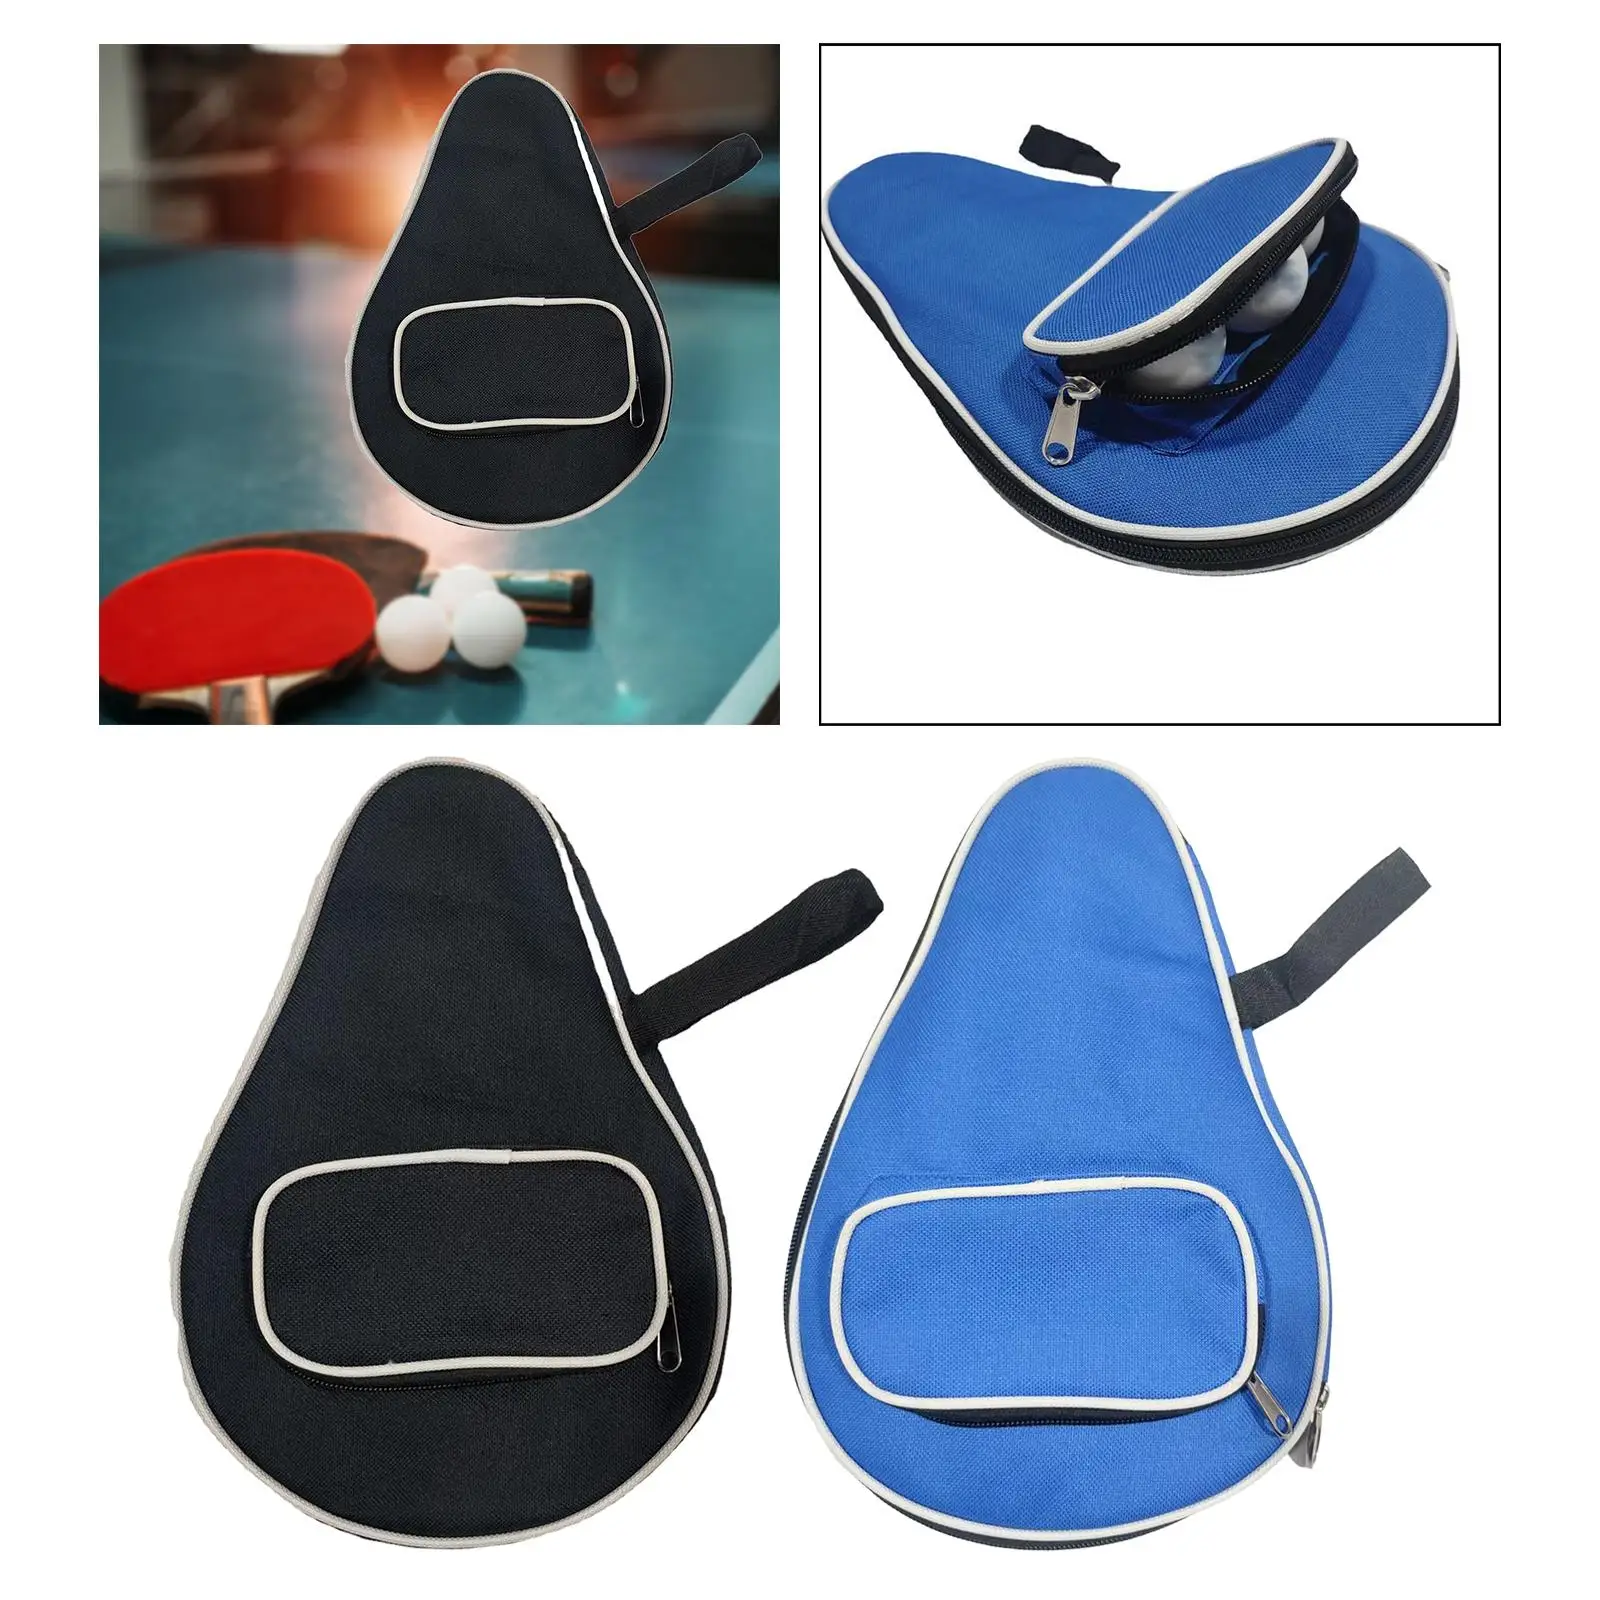 Table Tennis Racket Cover Waterproof Dustproof Portable Sturdy Reusable Racket Pocket for Outdoor Travel Competition Training